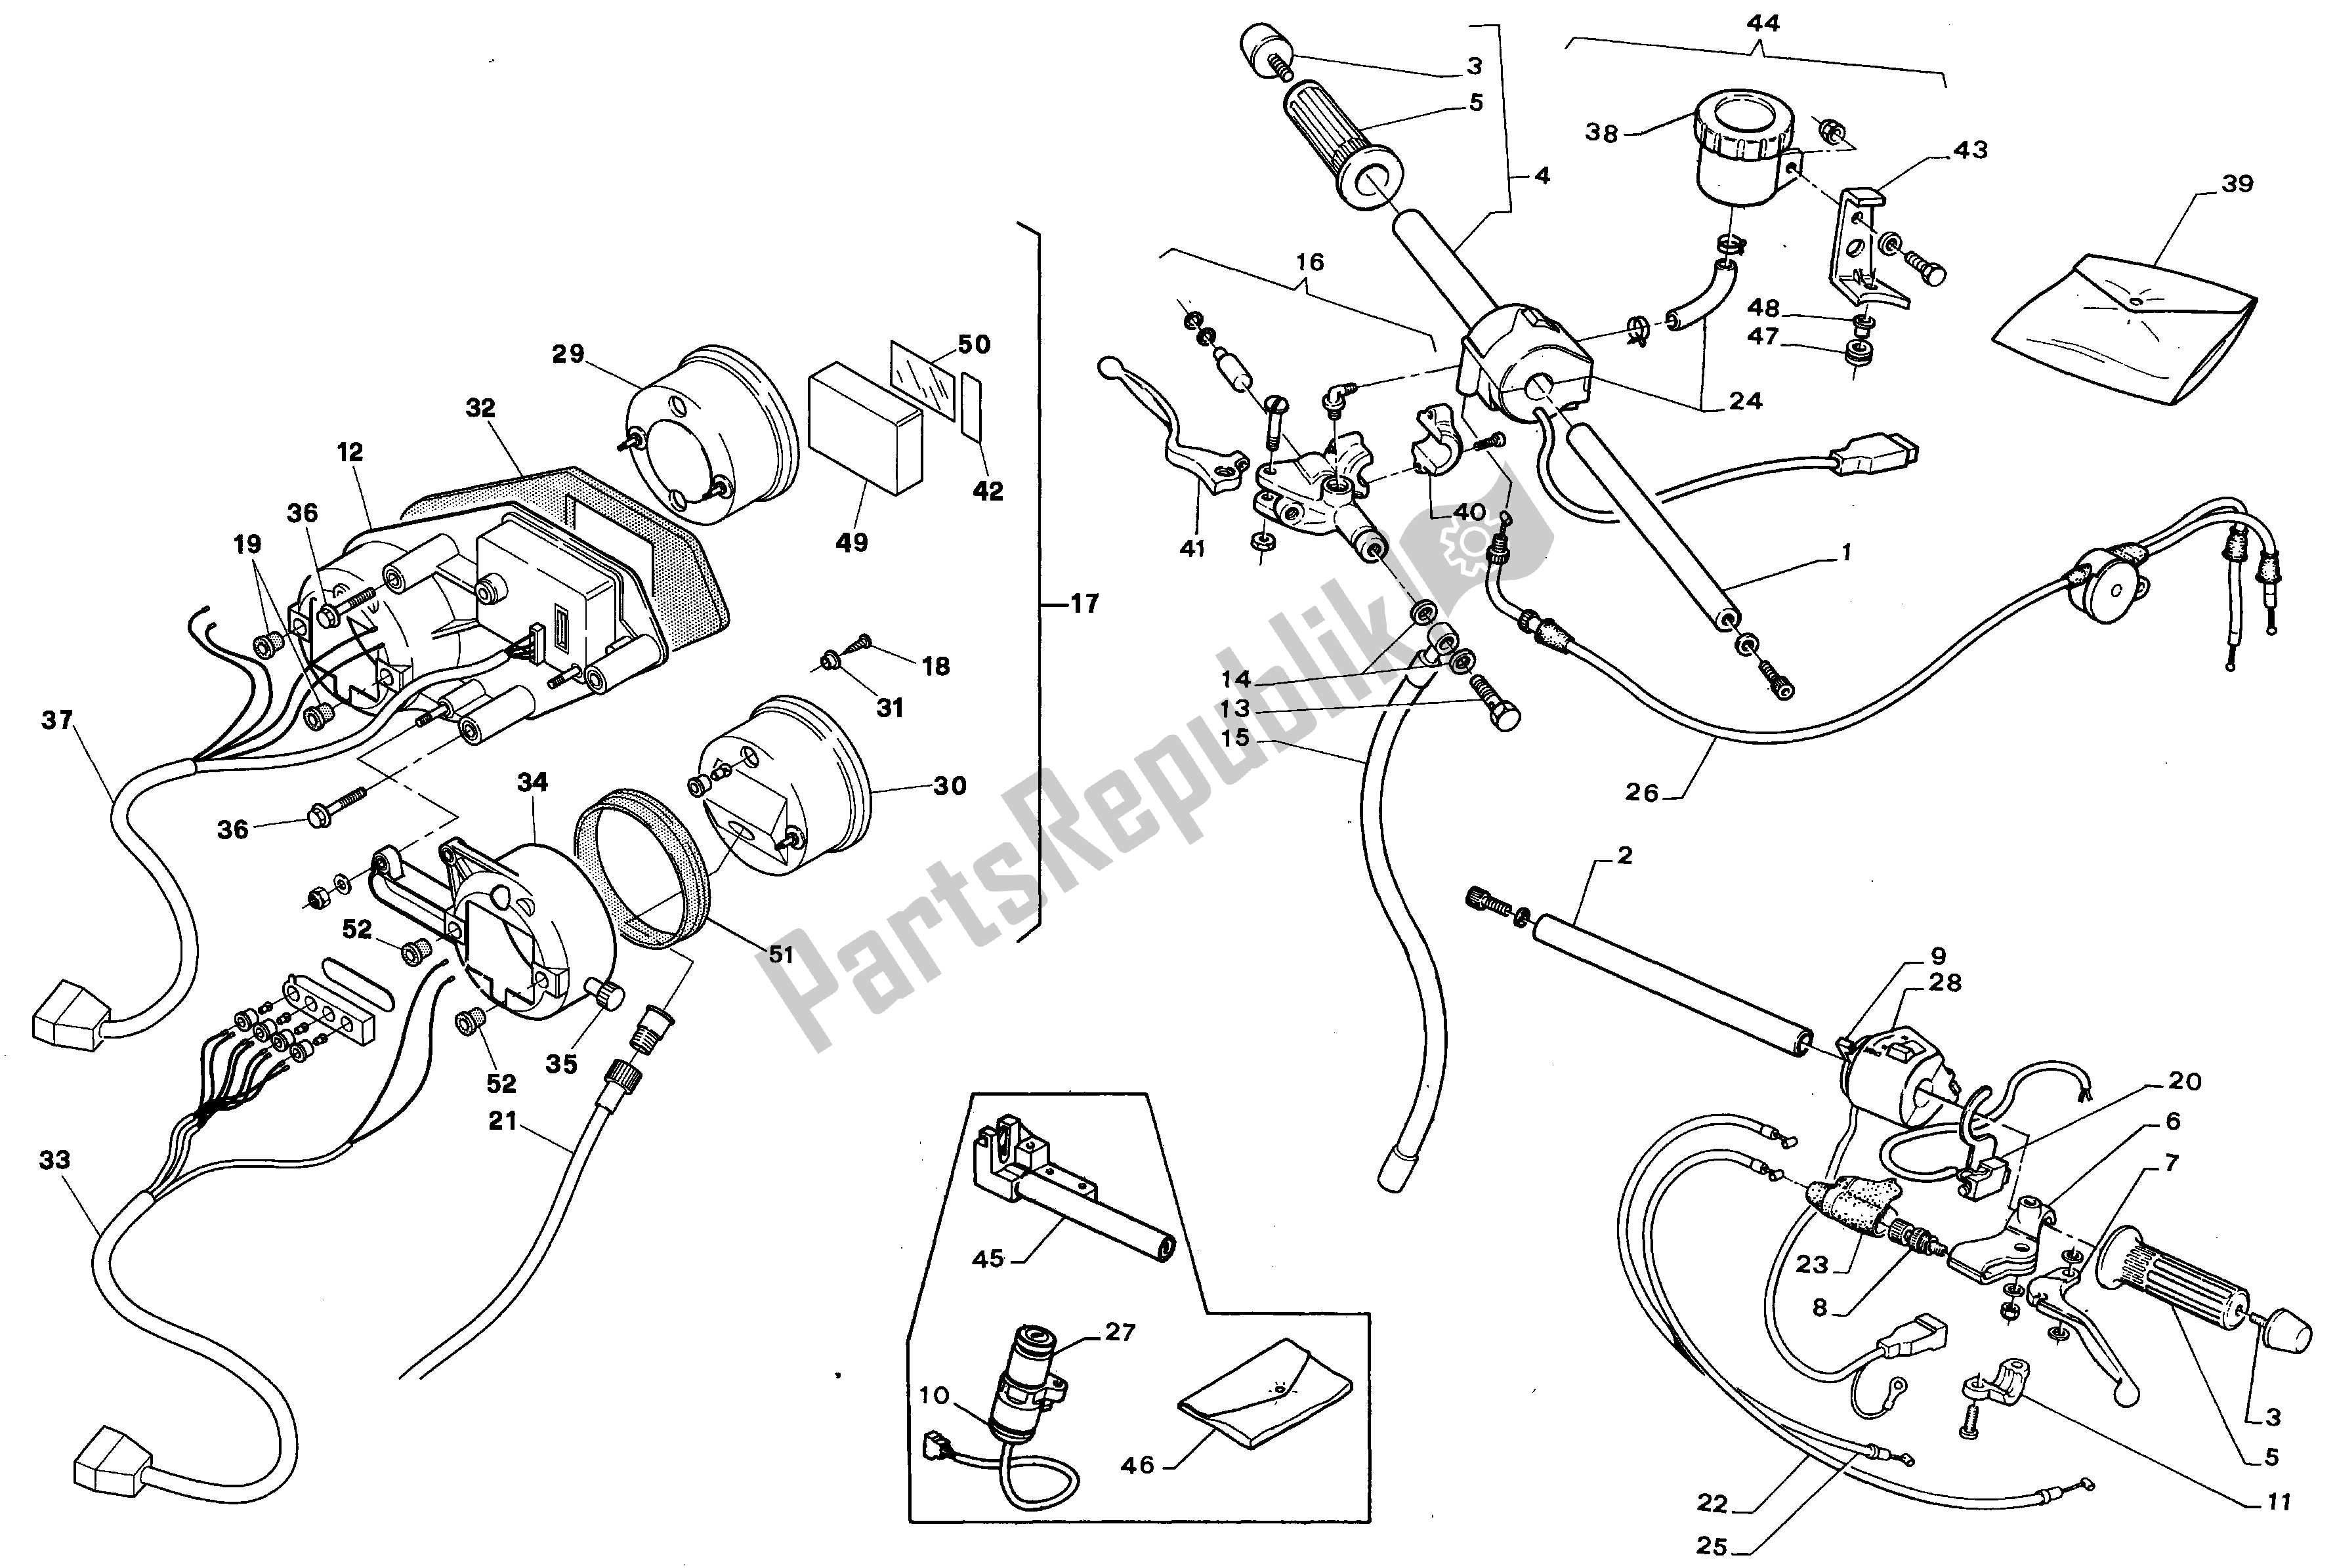 All parts for the Handle Bars And Commands of the Aprilia RS 125 1995